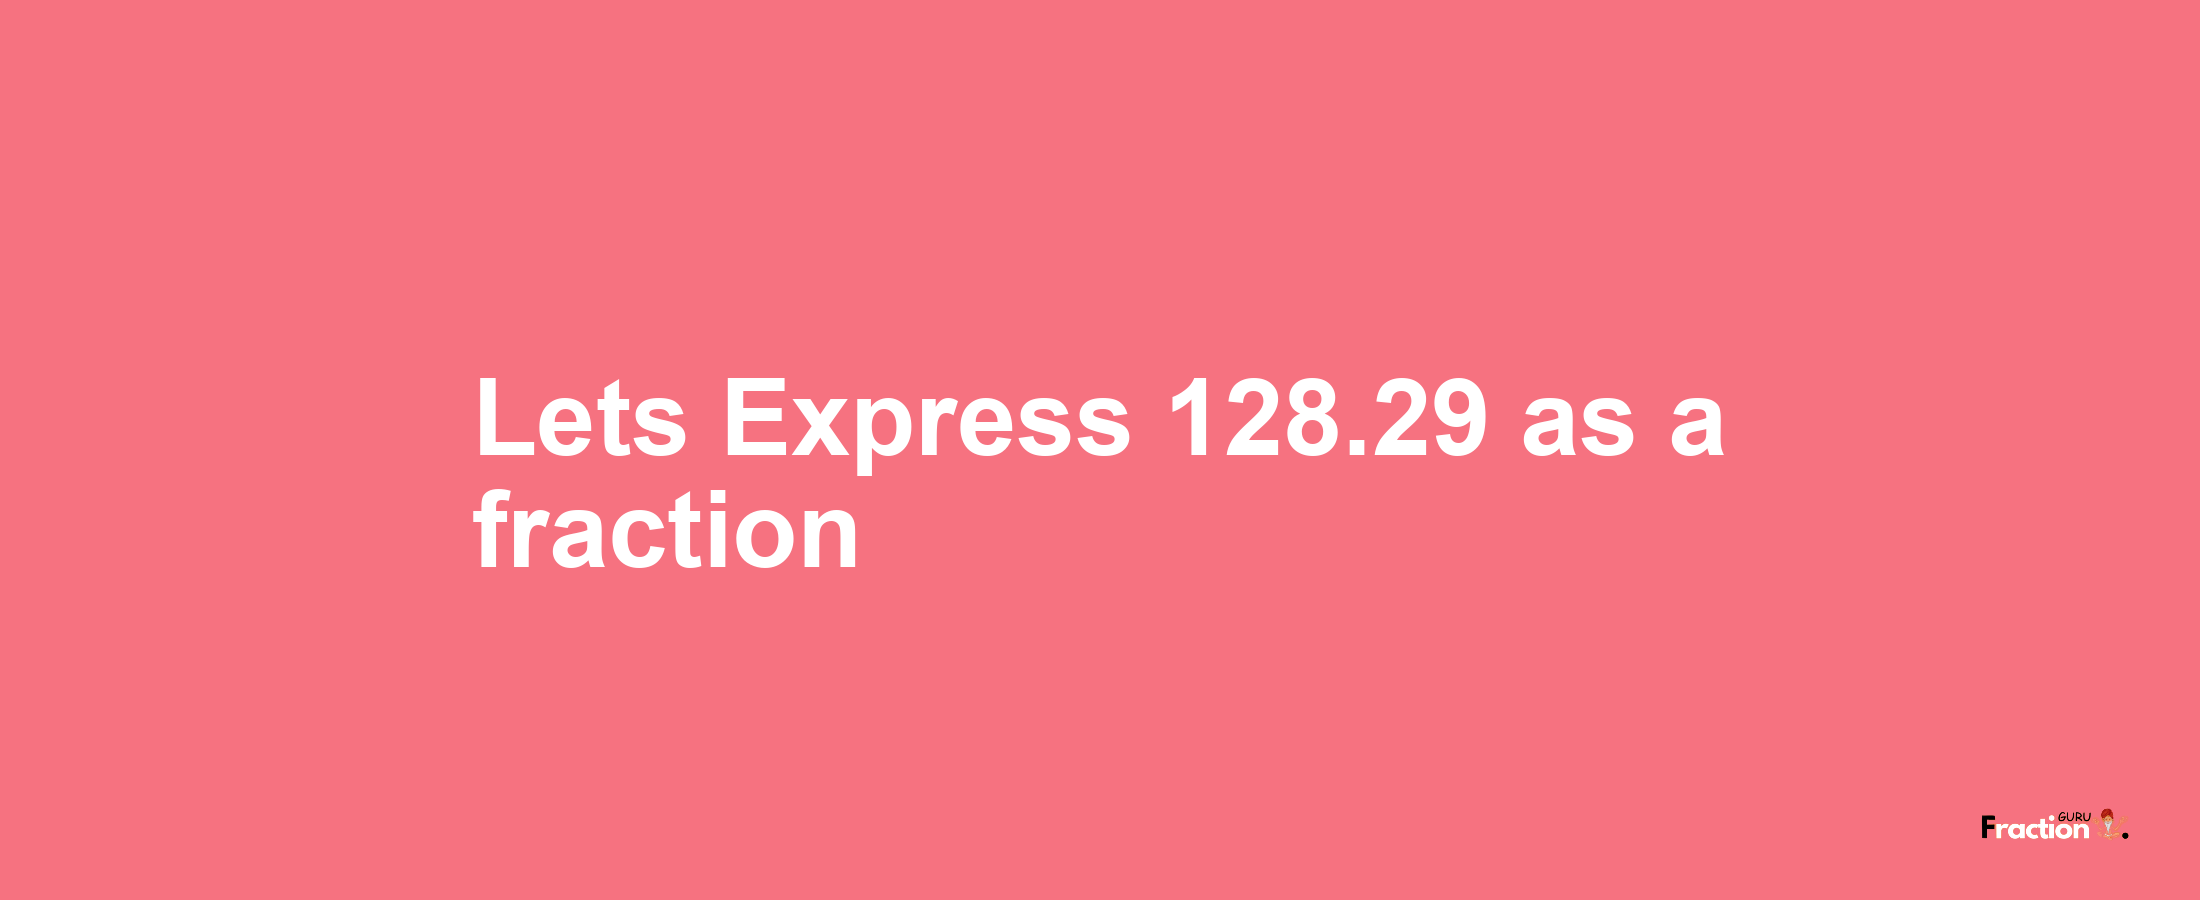 Lets Express 128.29 as afraction